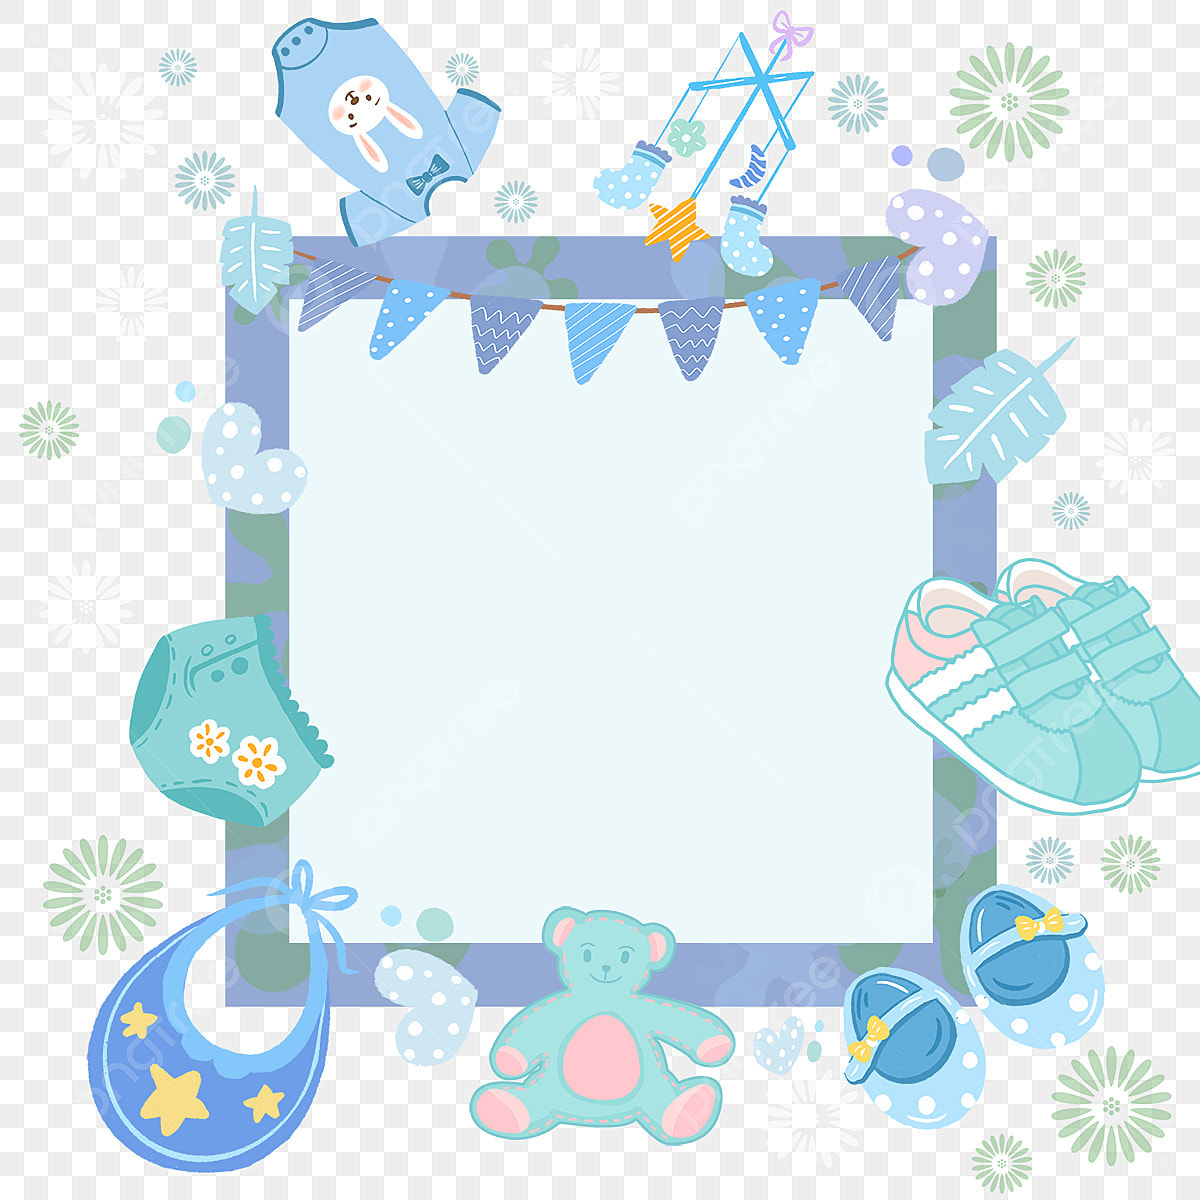 Baby Boy Border Png Transparent Images Free Download | Vector for Free Printable Baby Borders For Paper